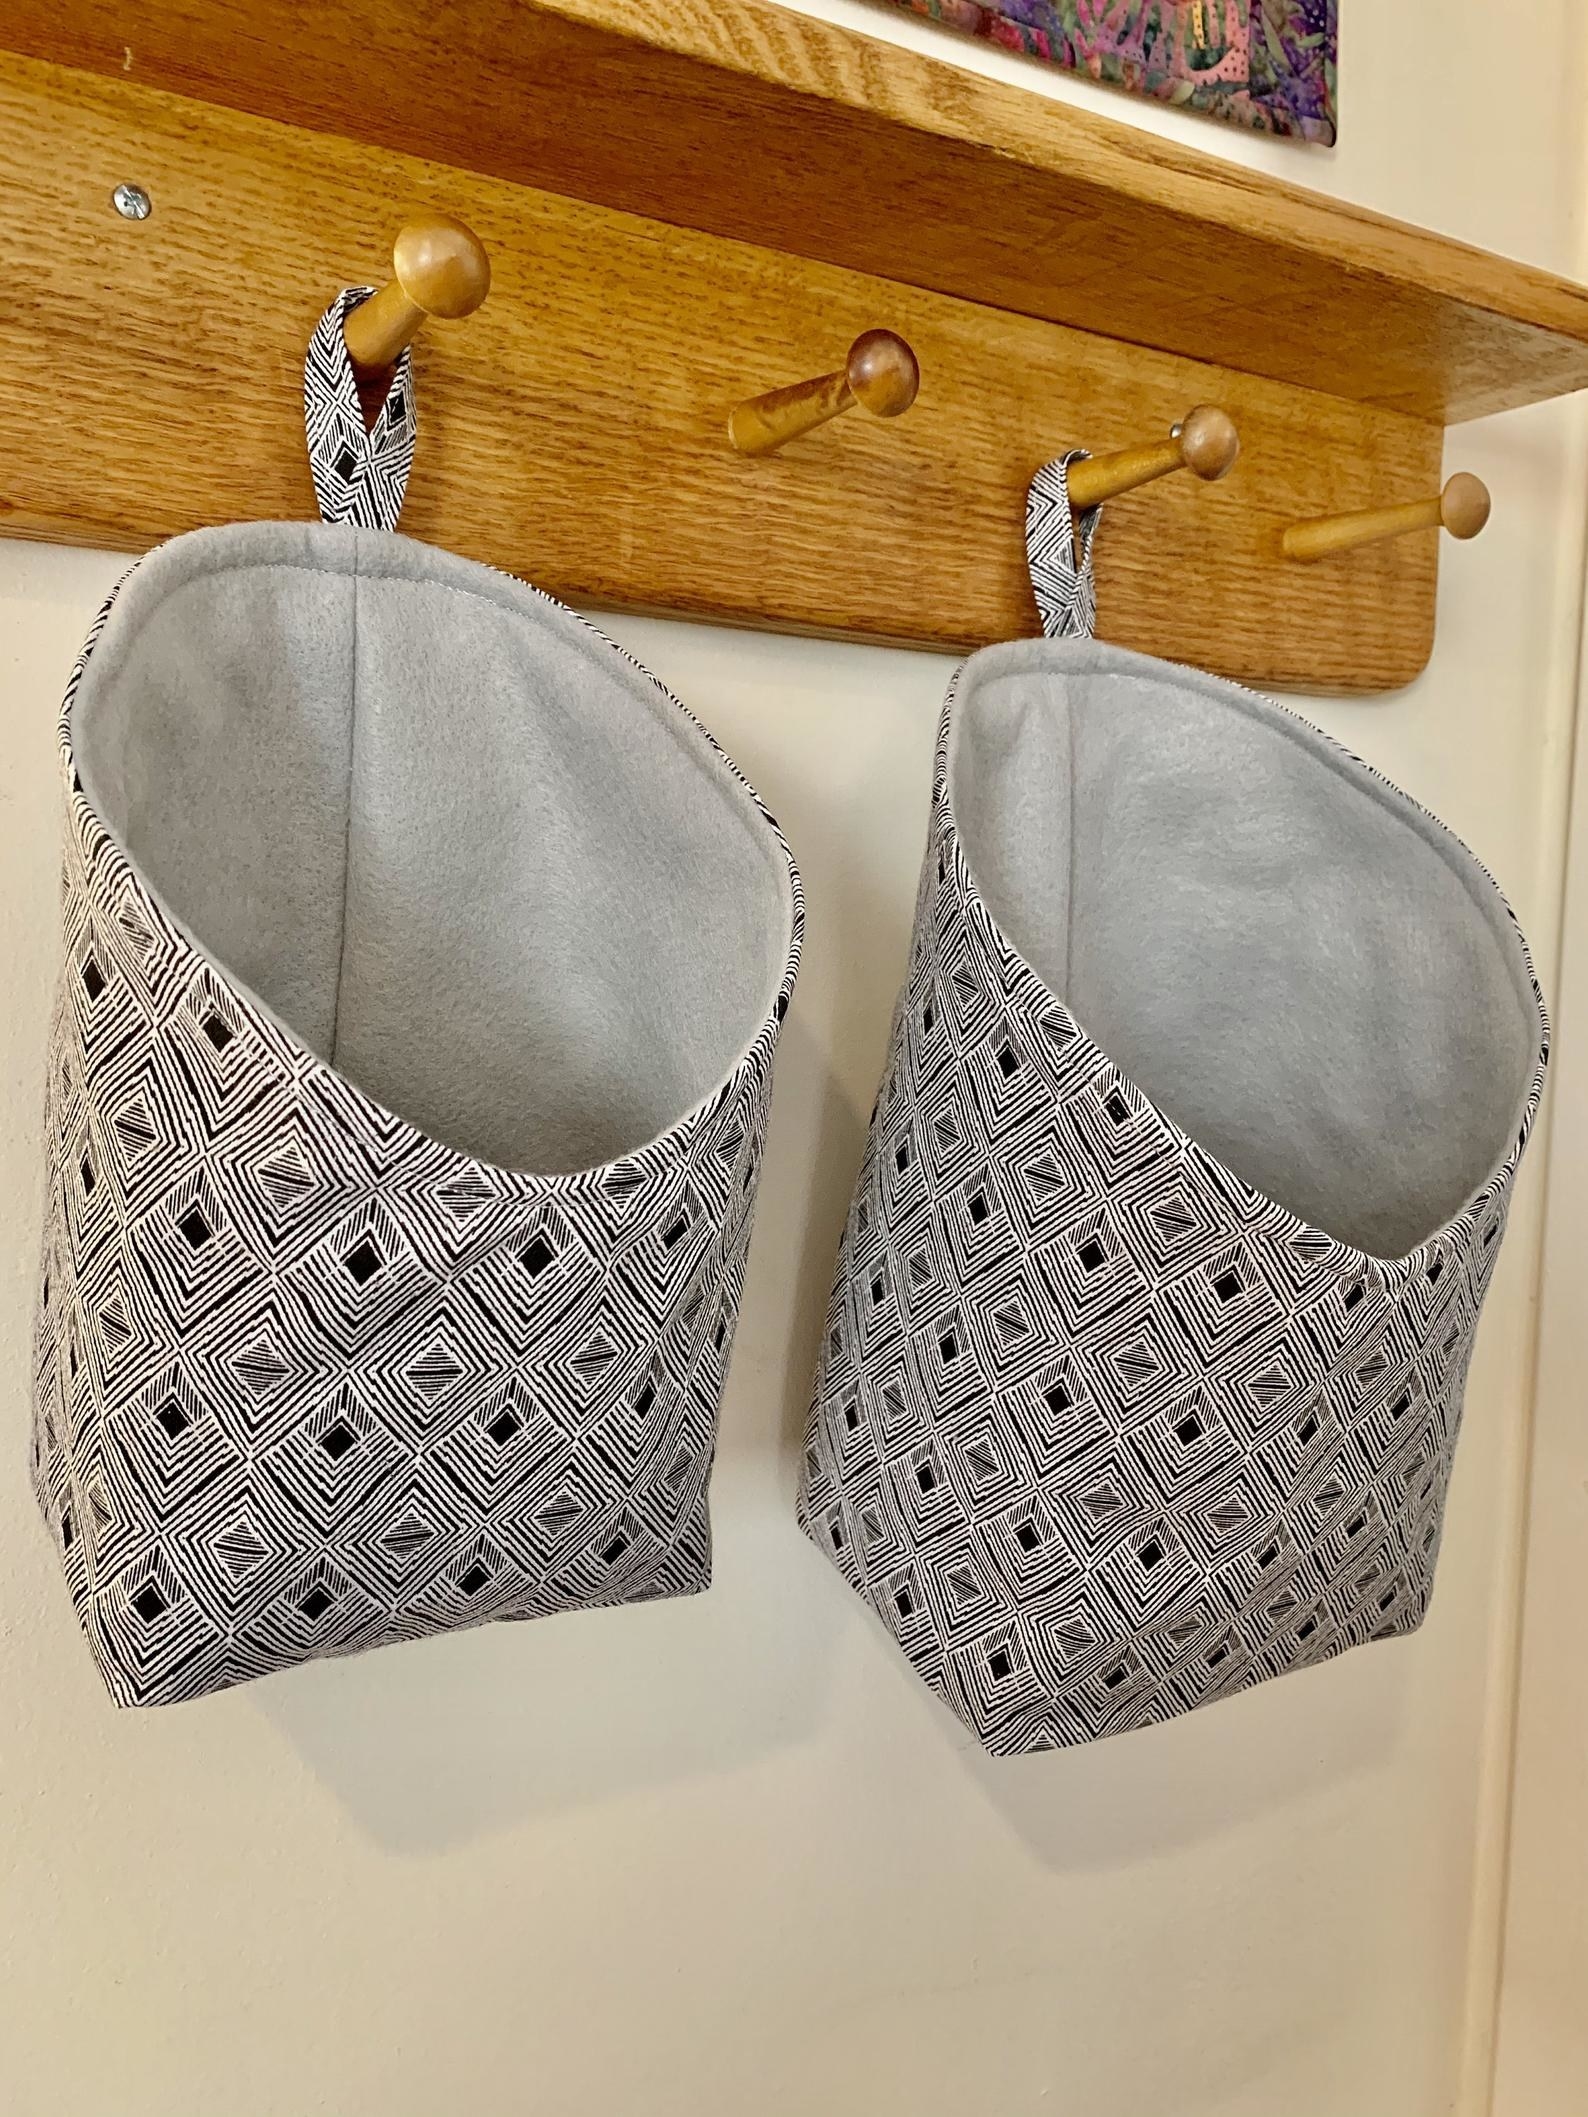 Two patterned fabric storage pods hanging from kitchen hooks